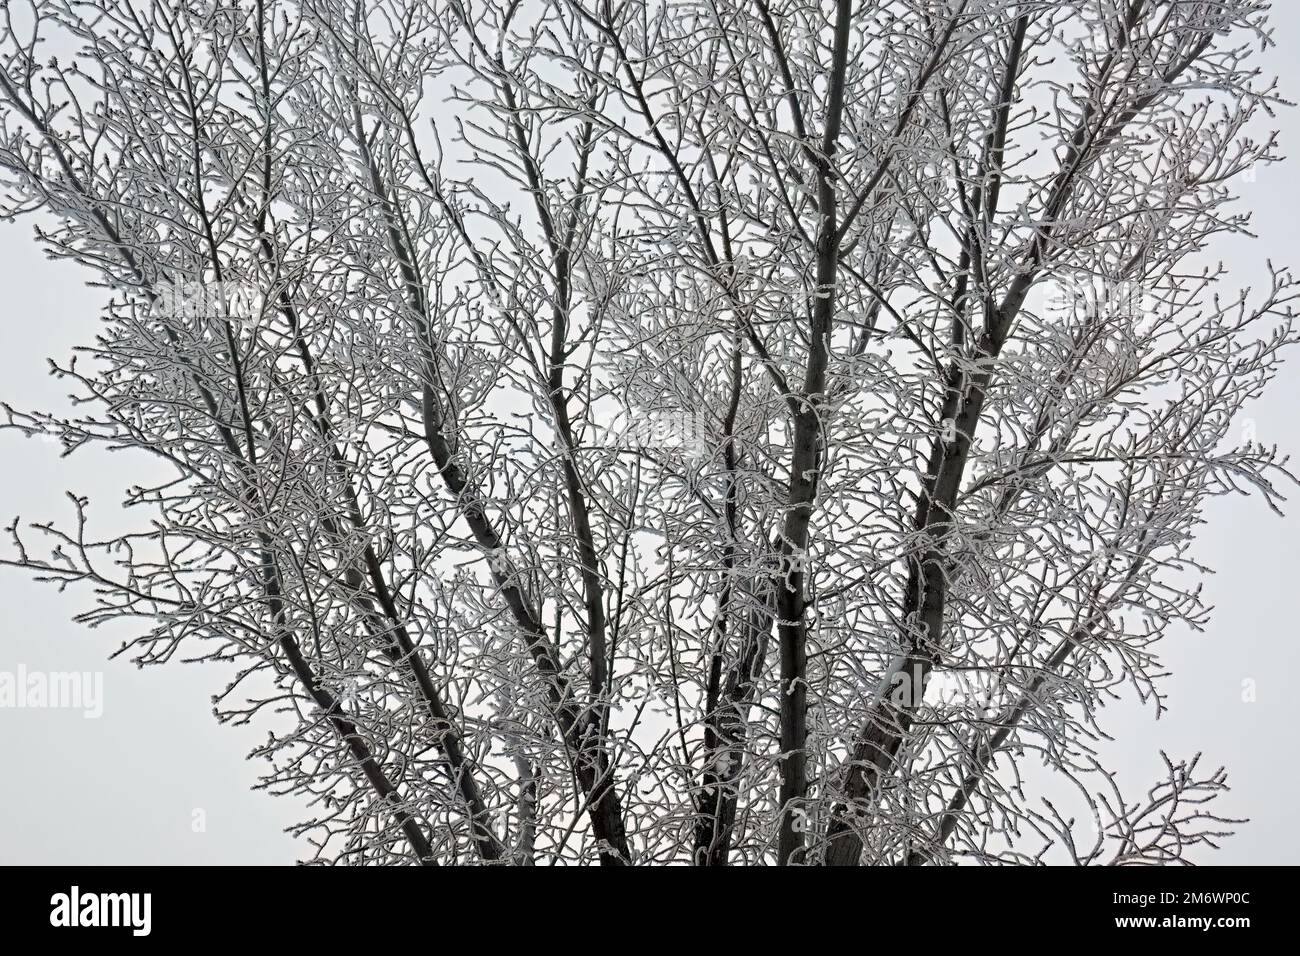 A close up image of a deciduous tree covered with frost on a hill top overlooking a frozen lake on a foggy day in rural Alberta Canada. Stock Photo